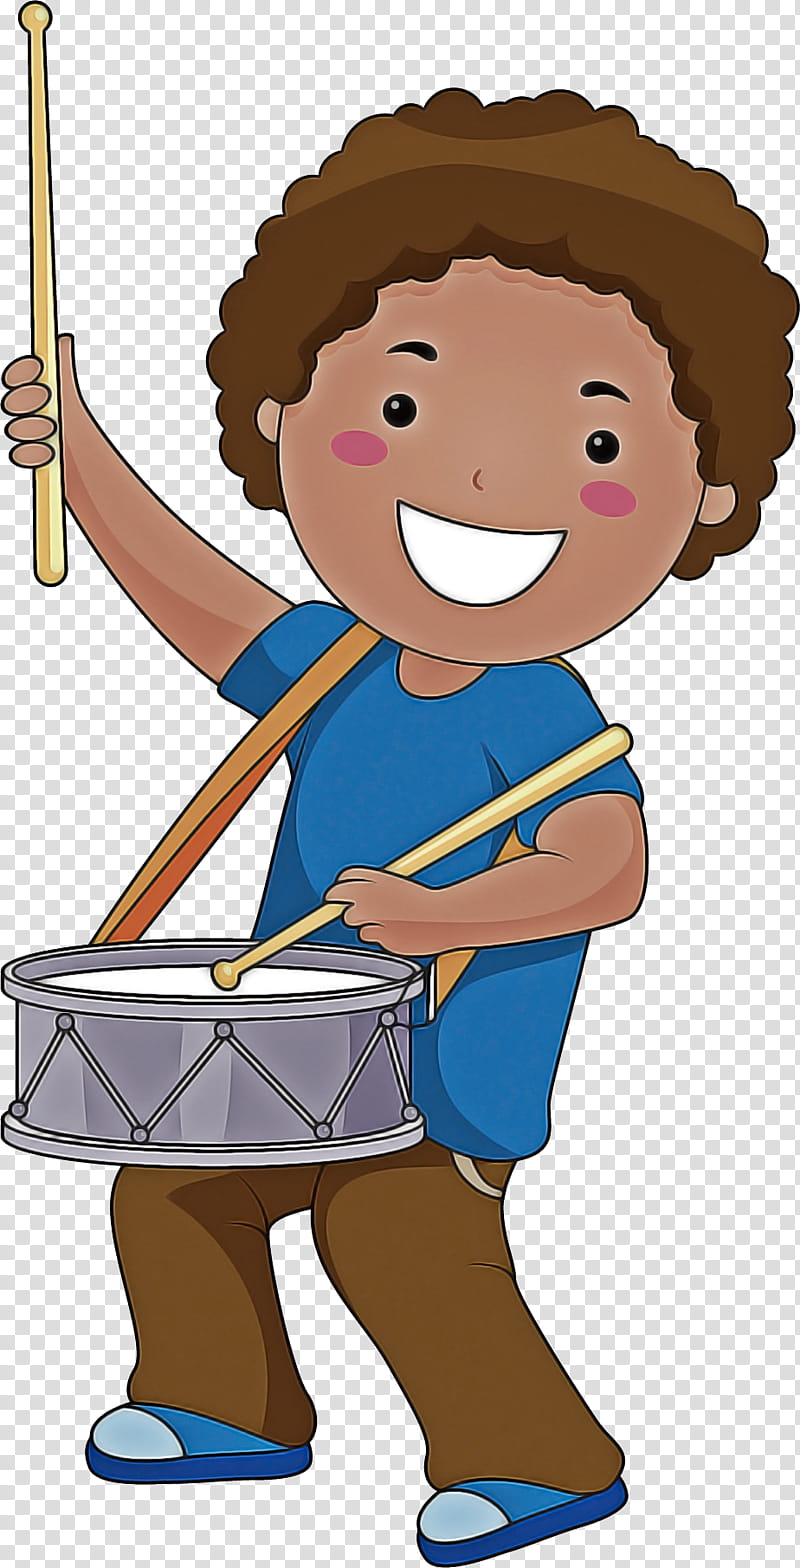 cartoon drum marching percussion drummer, Cartoon, Hand Drum, Play, Musical Instrument transparent background PNG clipart